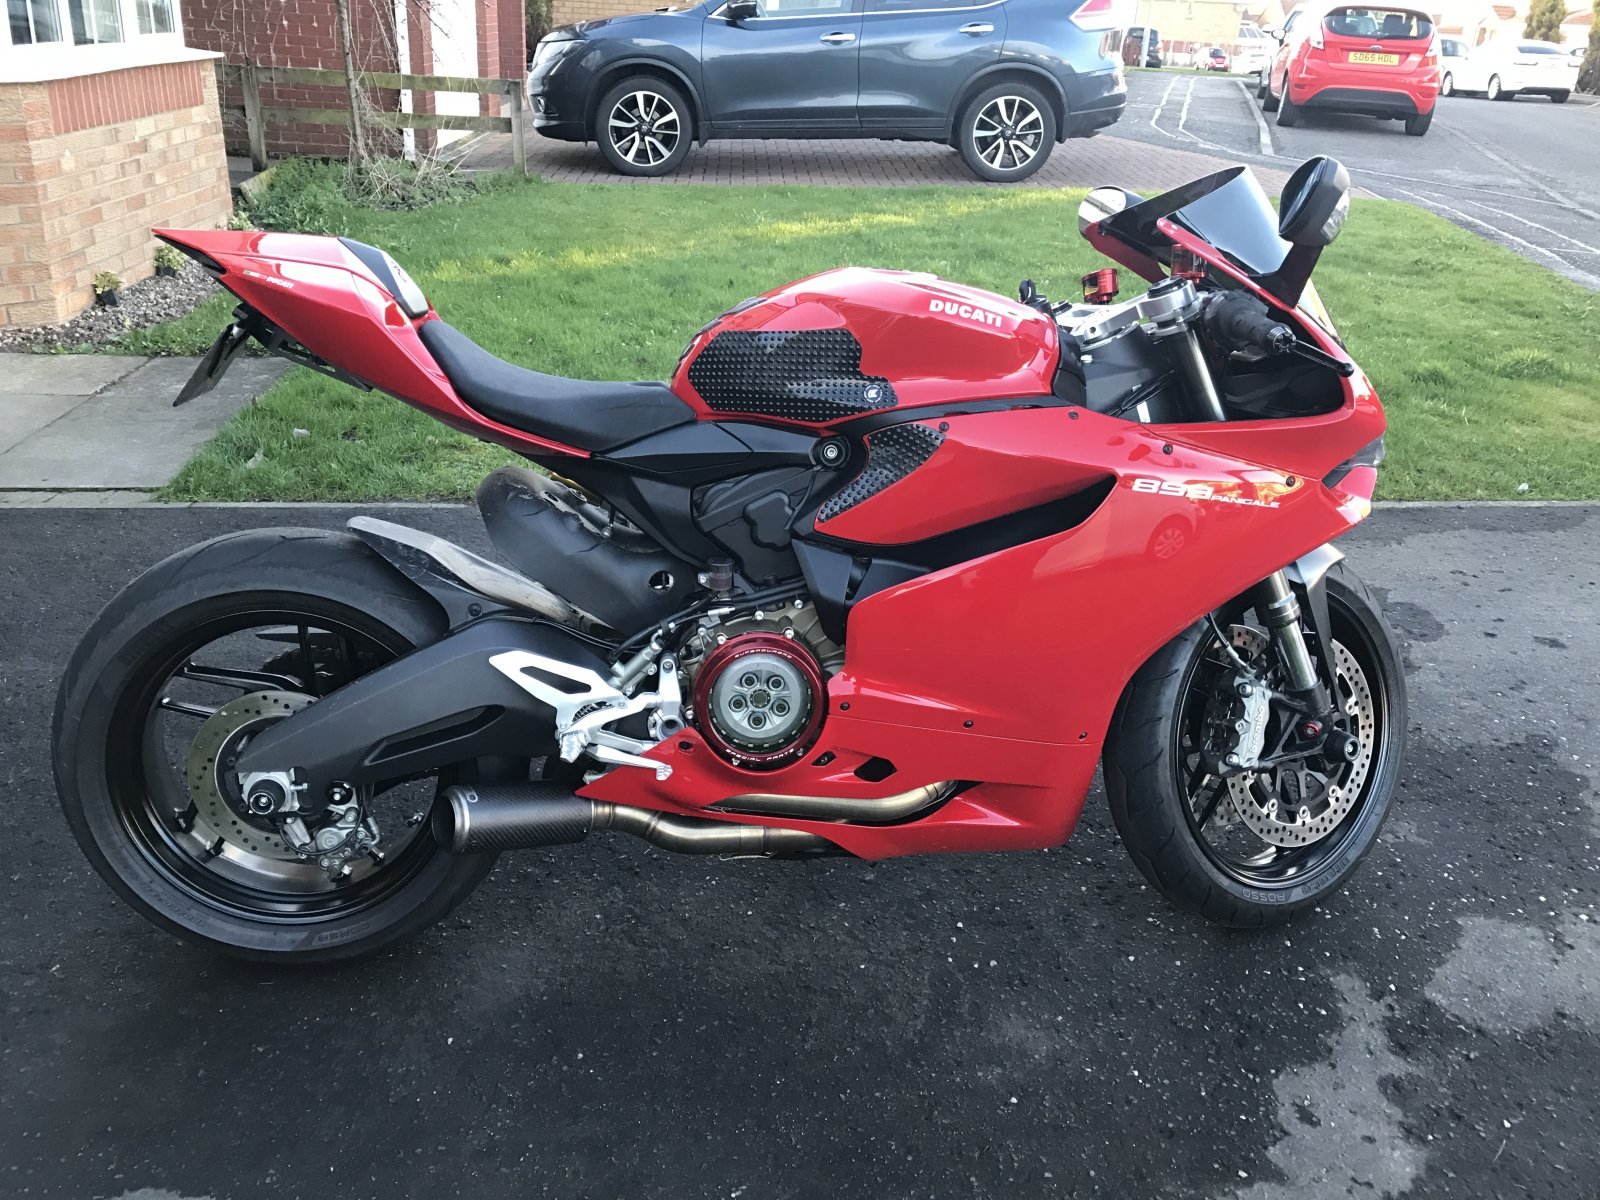 1199 Ducati 899 959 1199 1299 Modifications What Have You Done To Yours Page 33 Ducati Forum